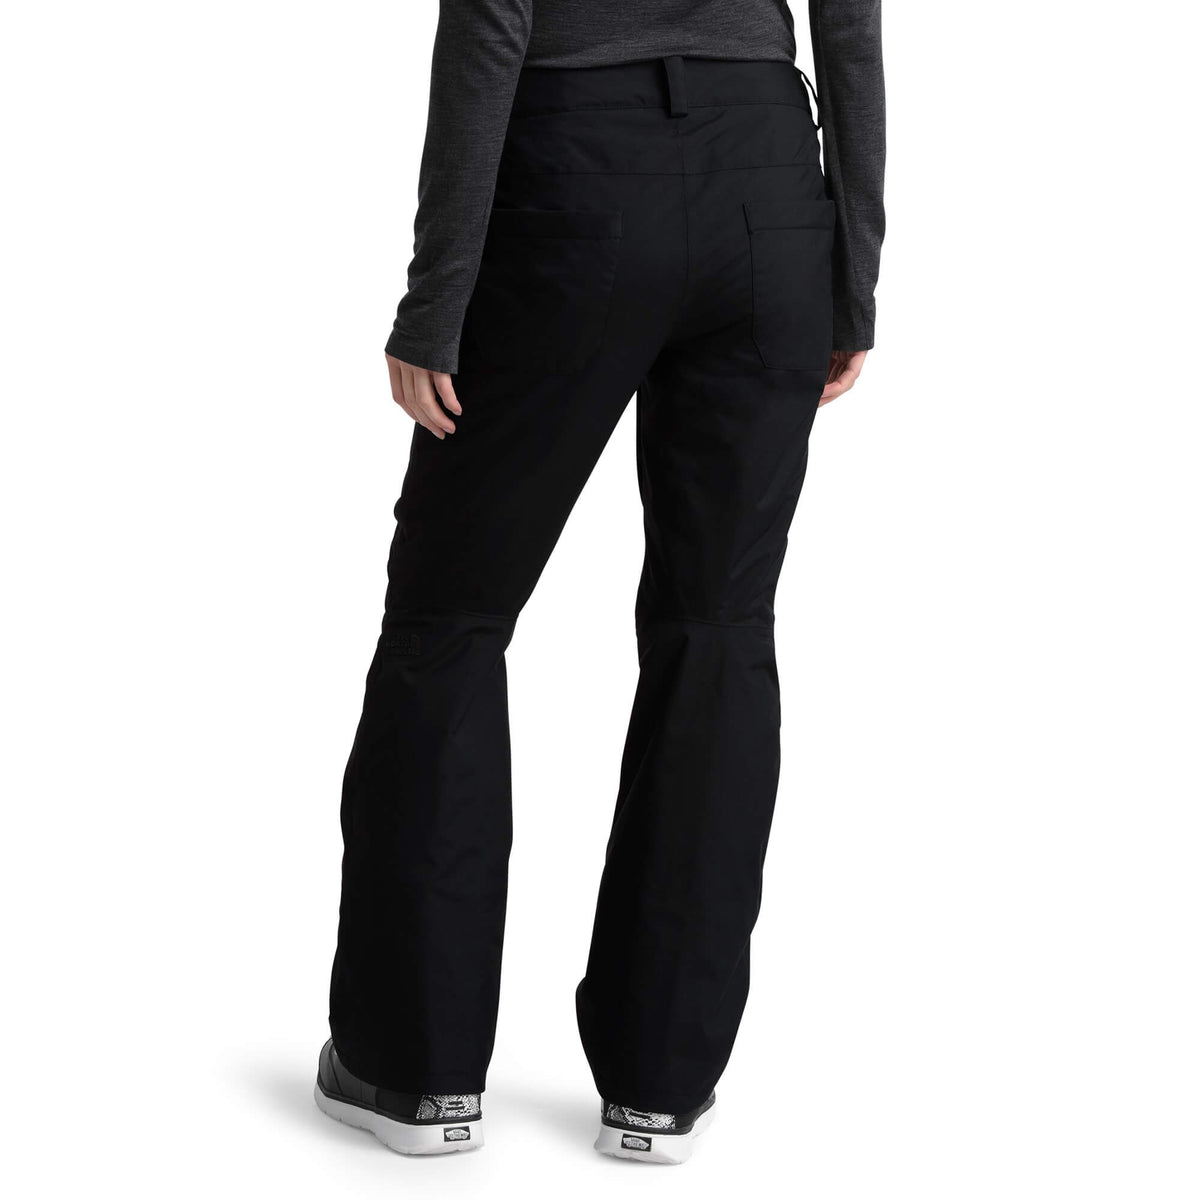 Item 860856 - The North Face Aboutaday Pants - Women's - Women